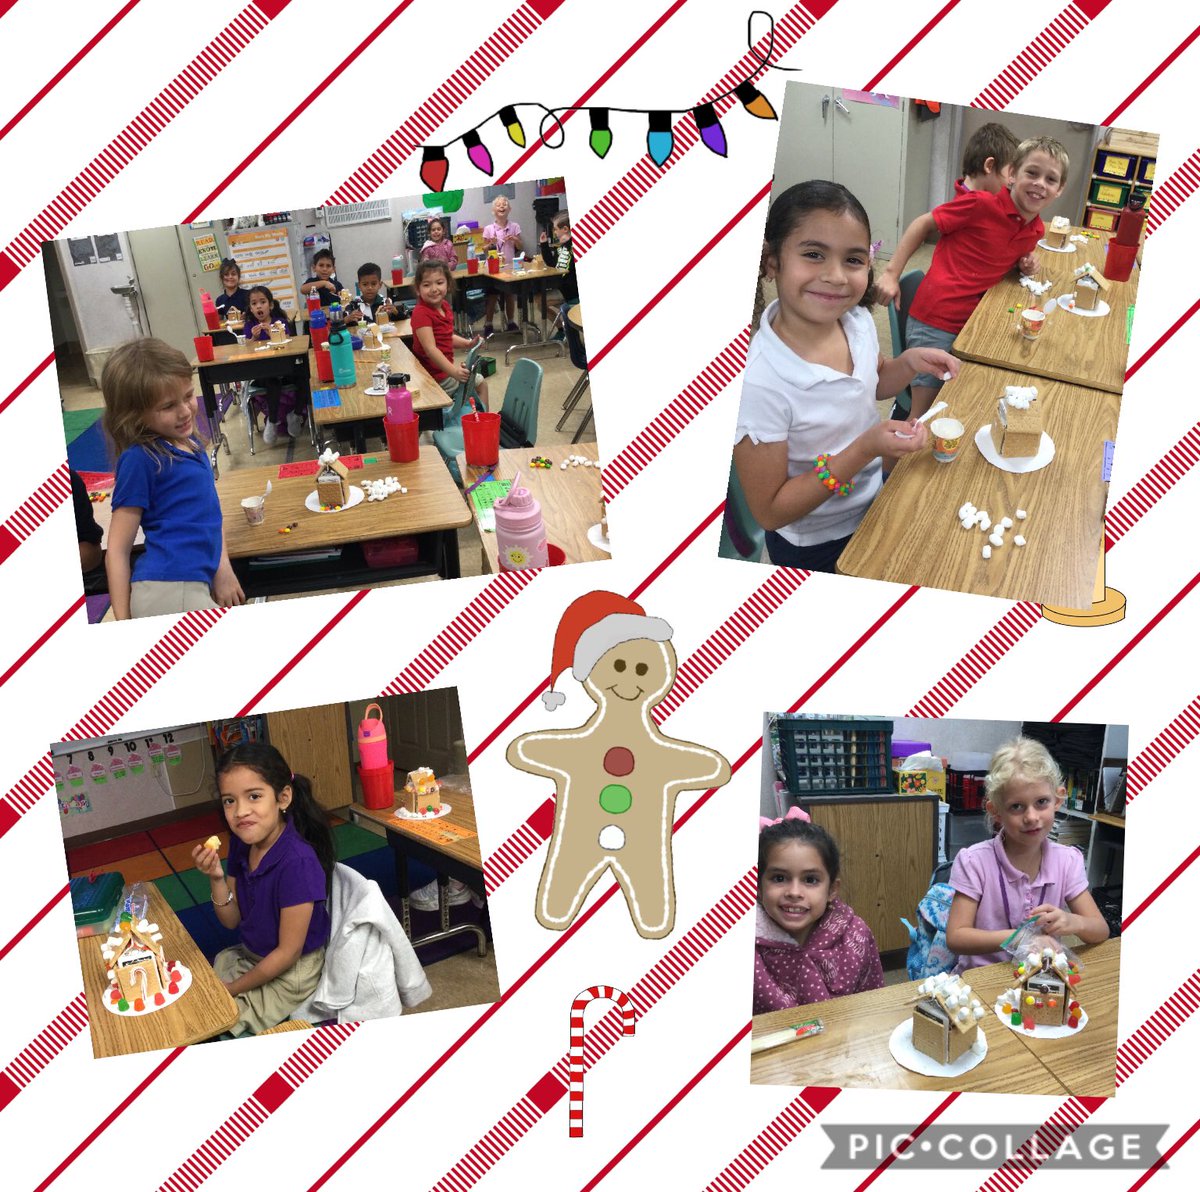 Gingerbread house construction! Always so much fun! @VineyardsVipers